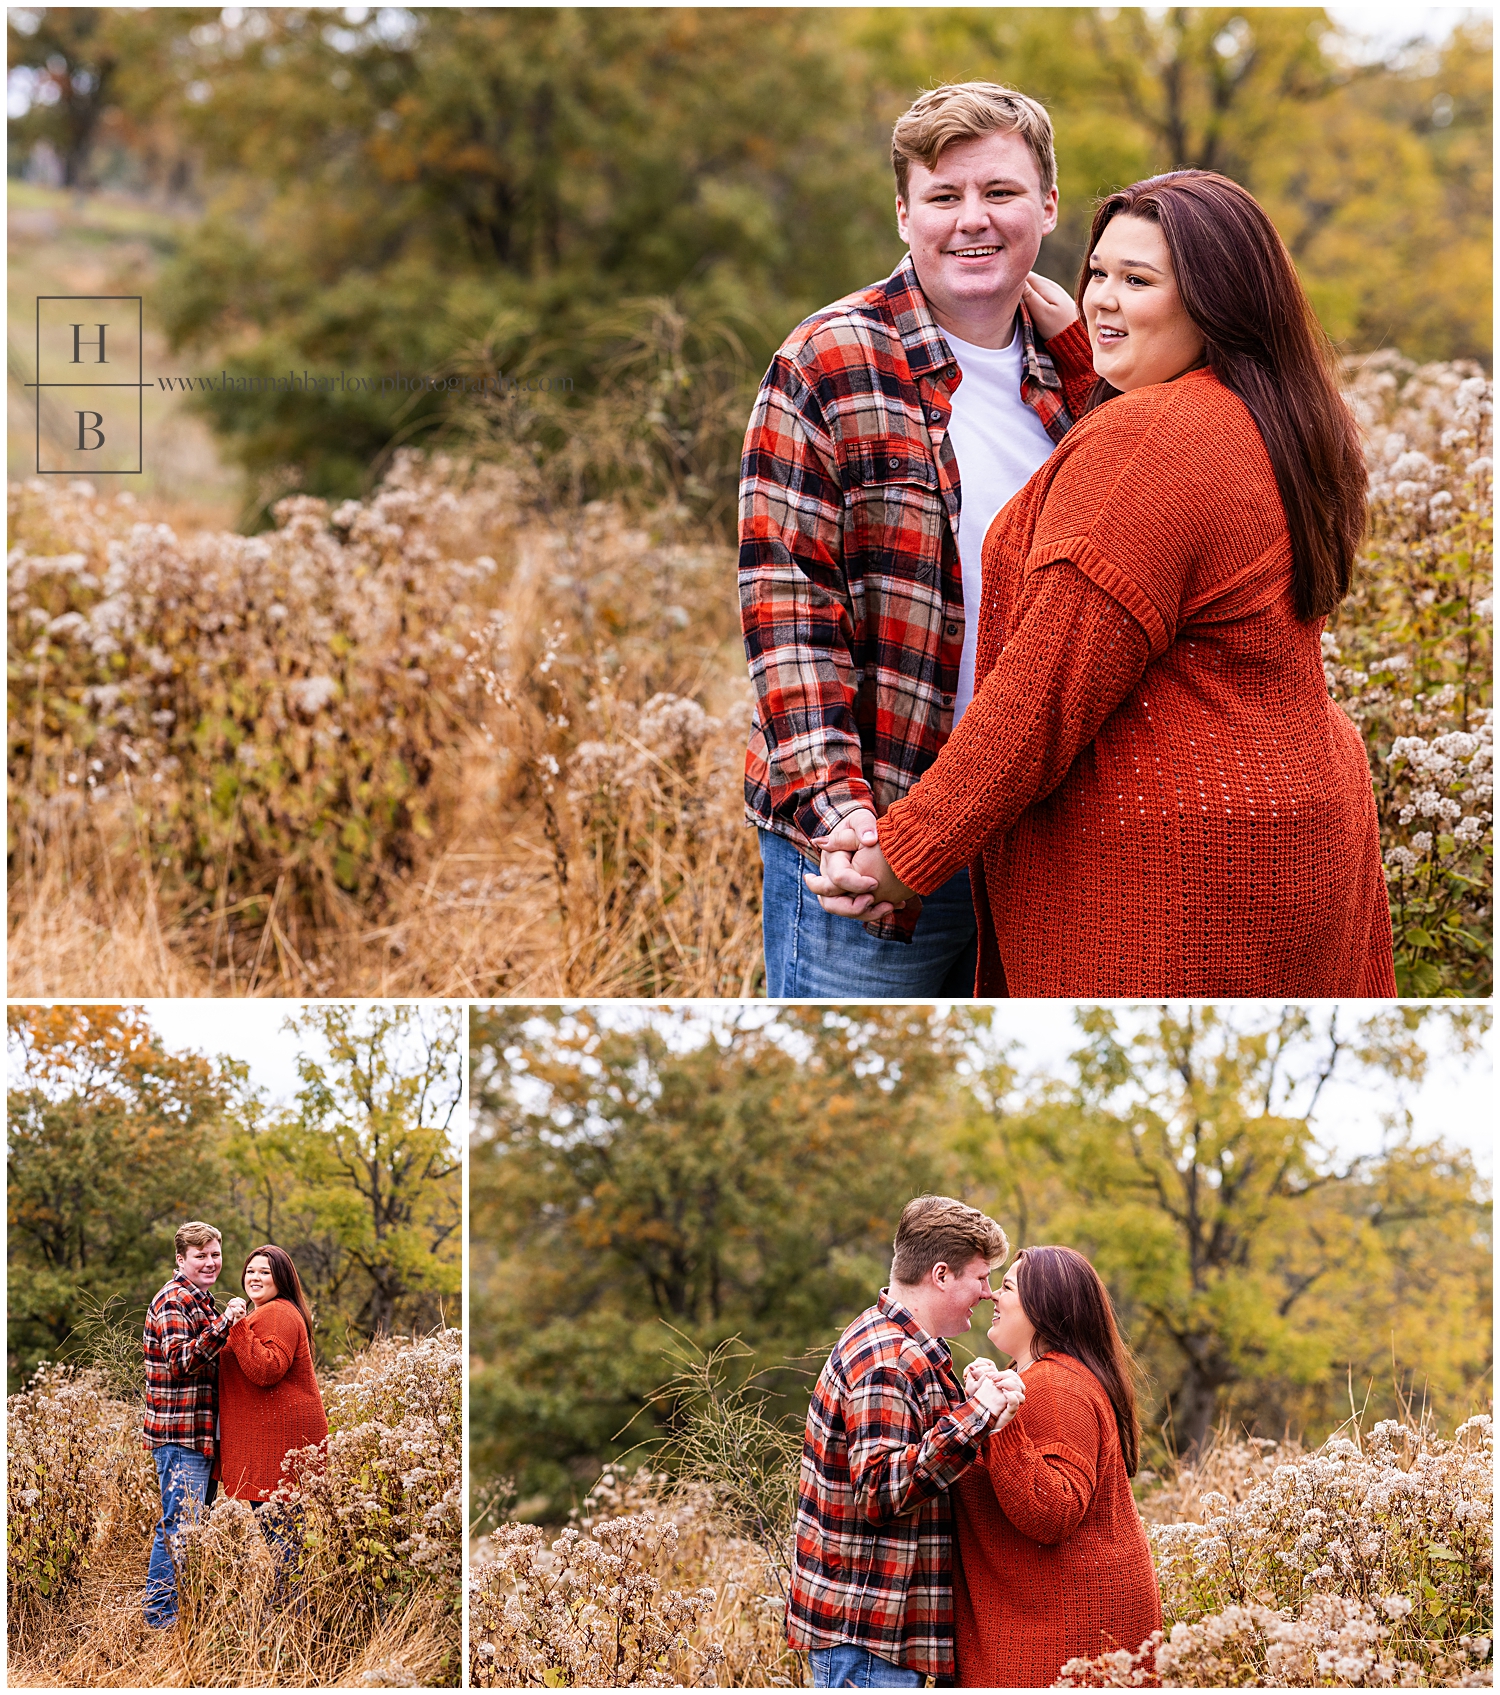 Woman in orange sweater poses for fall photos.